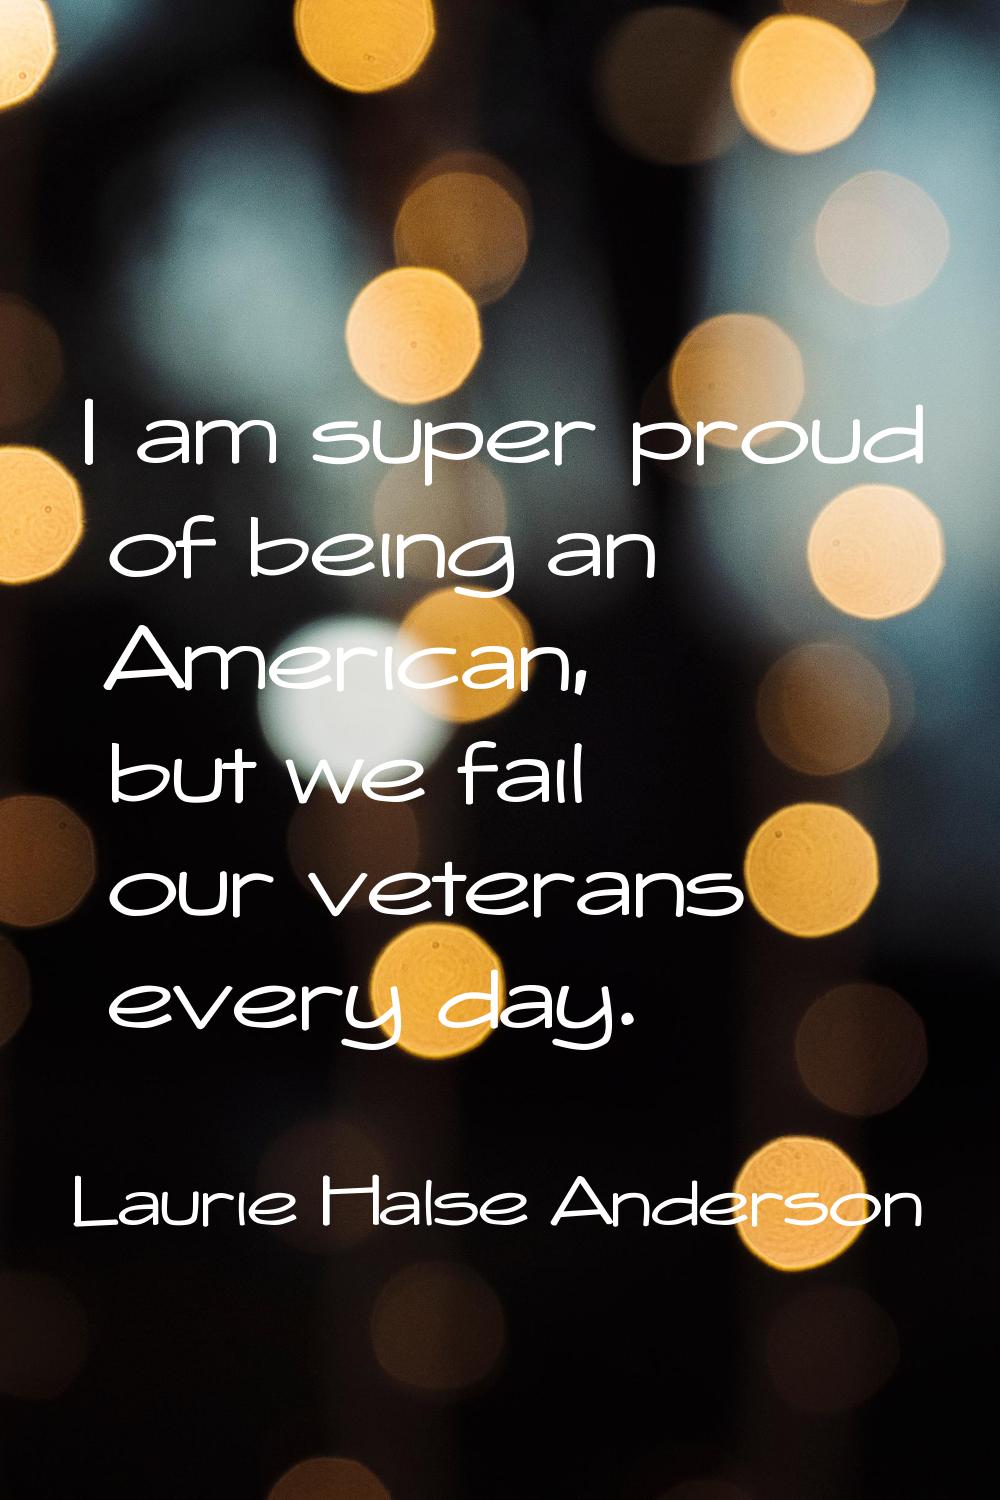 I am super proud of being an American, but we fail our veterans every day.